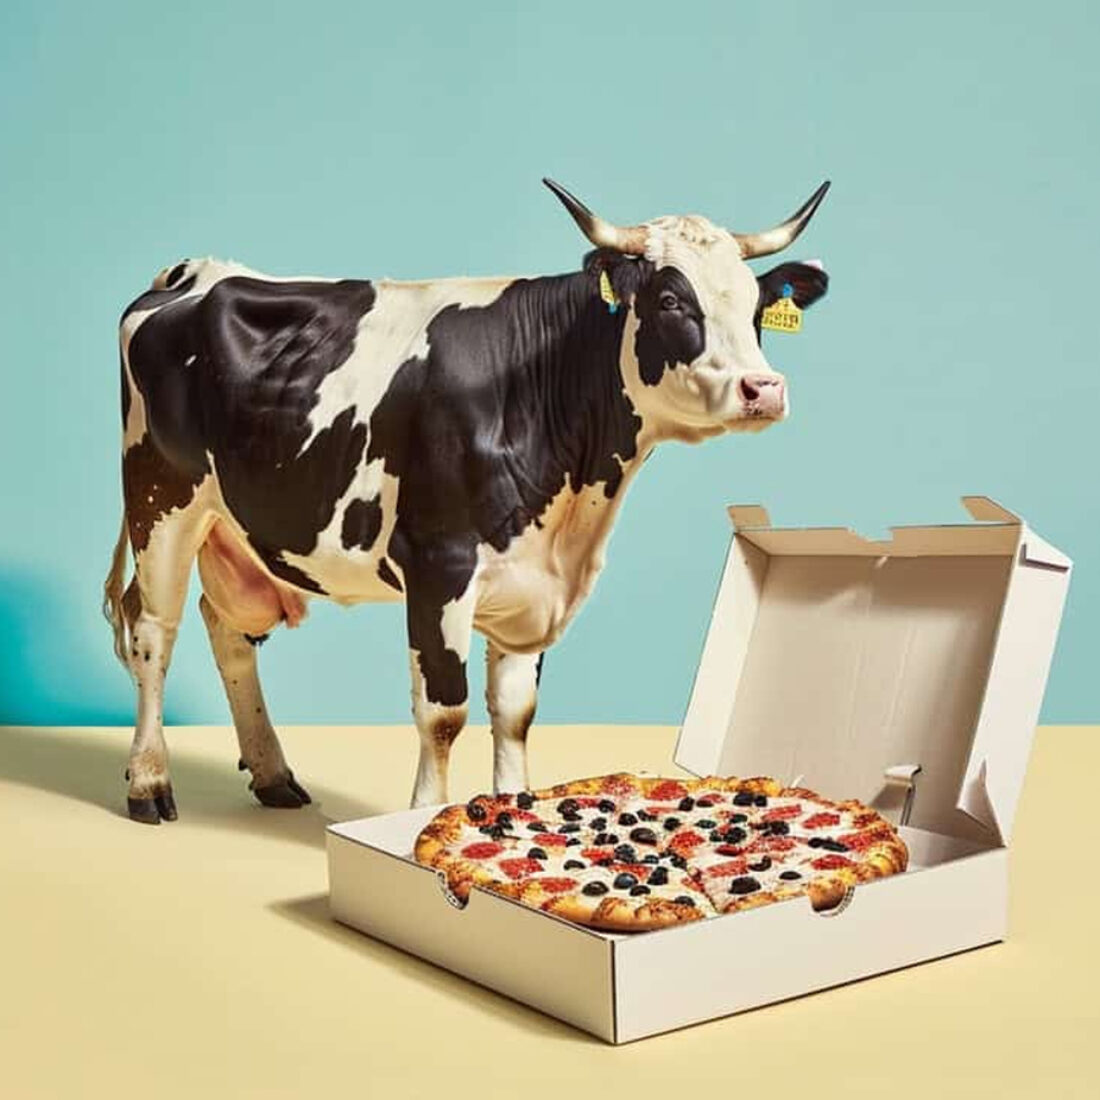 A cow looms over a boxed pizza. Image courtesy of NewMoo